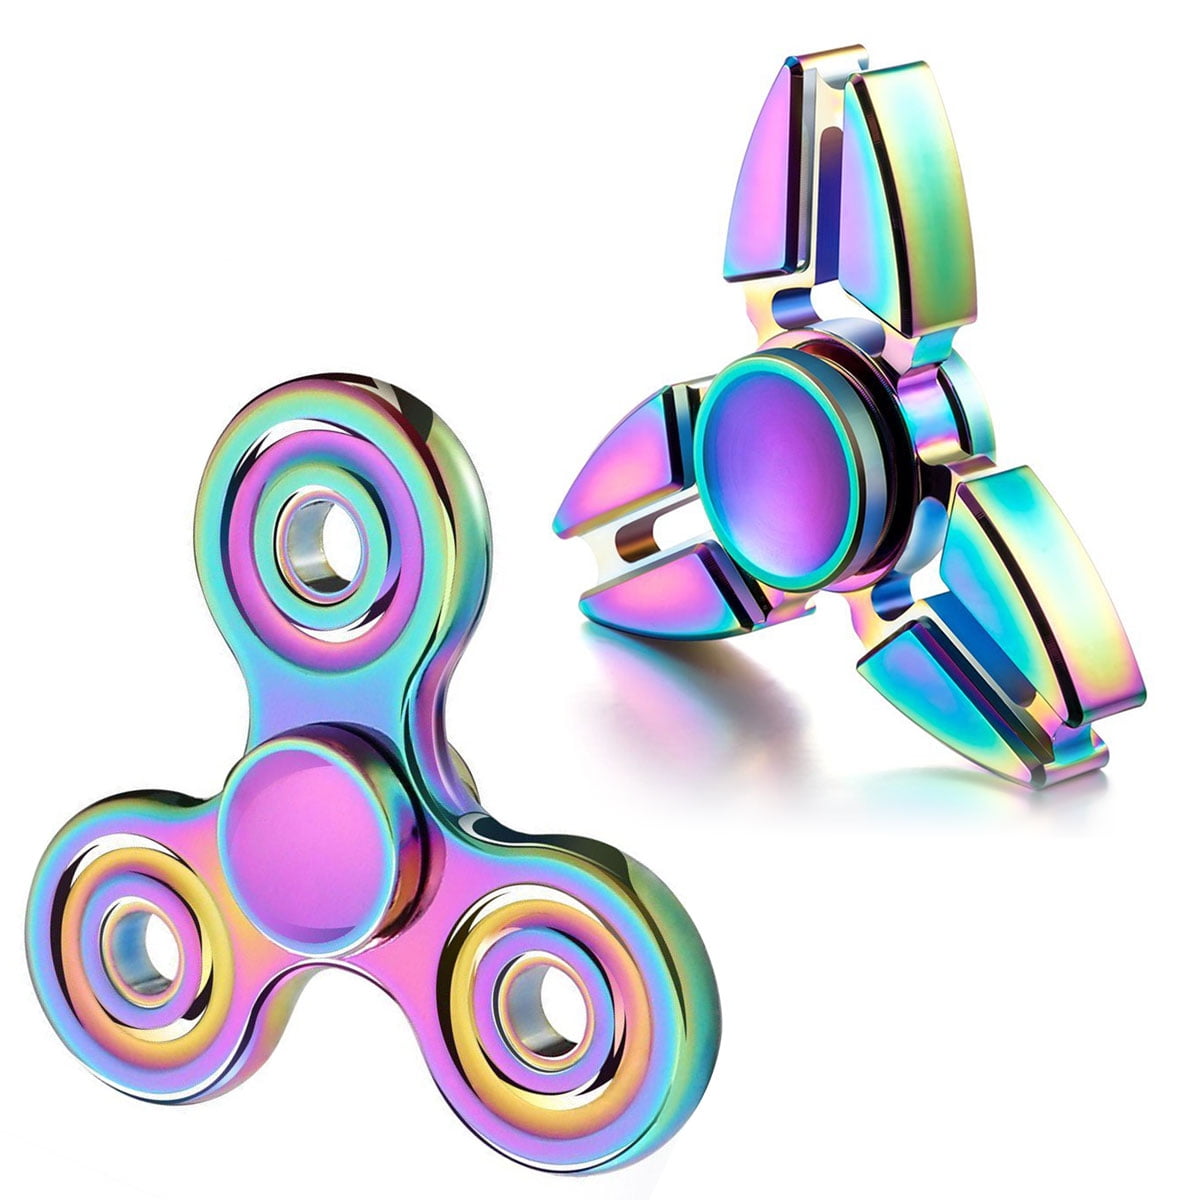 Details about   Spiner fidget spinner rainbow hand toy games other free shiping high quality 